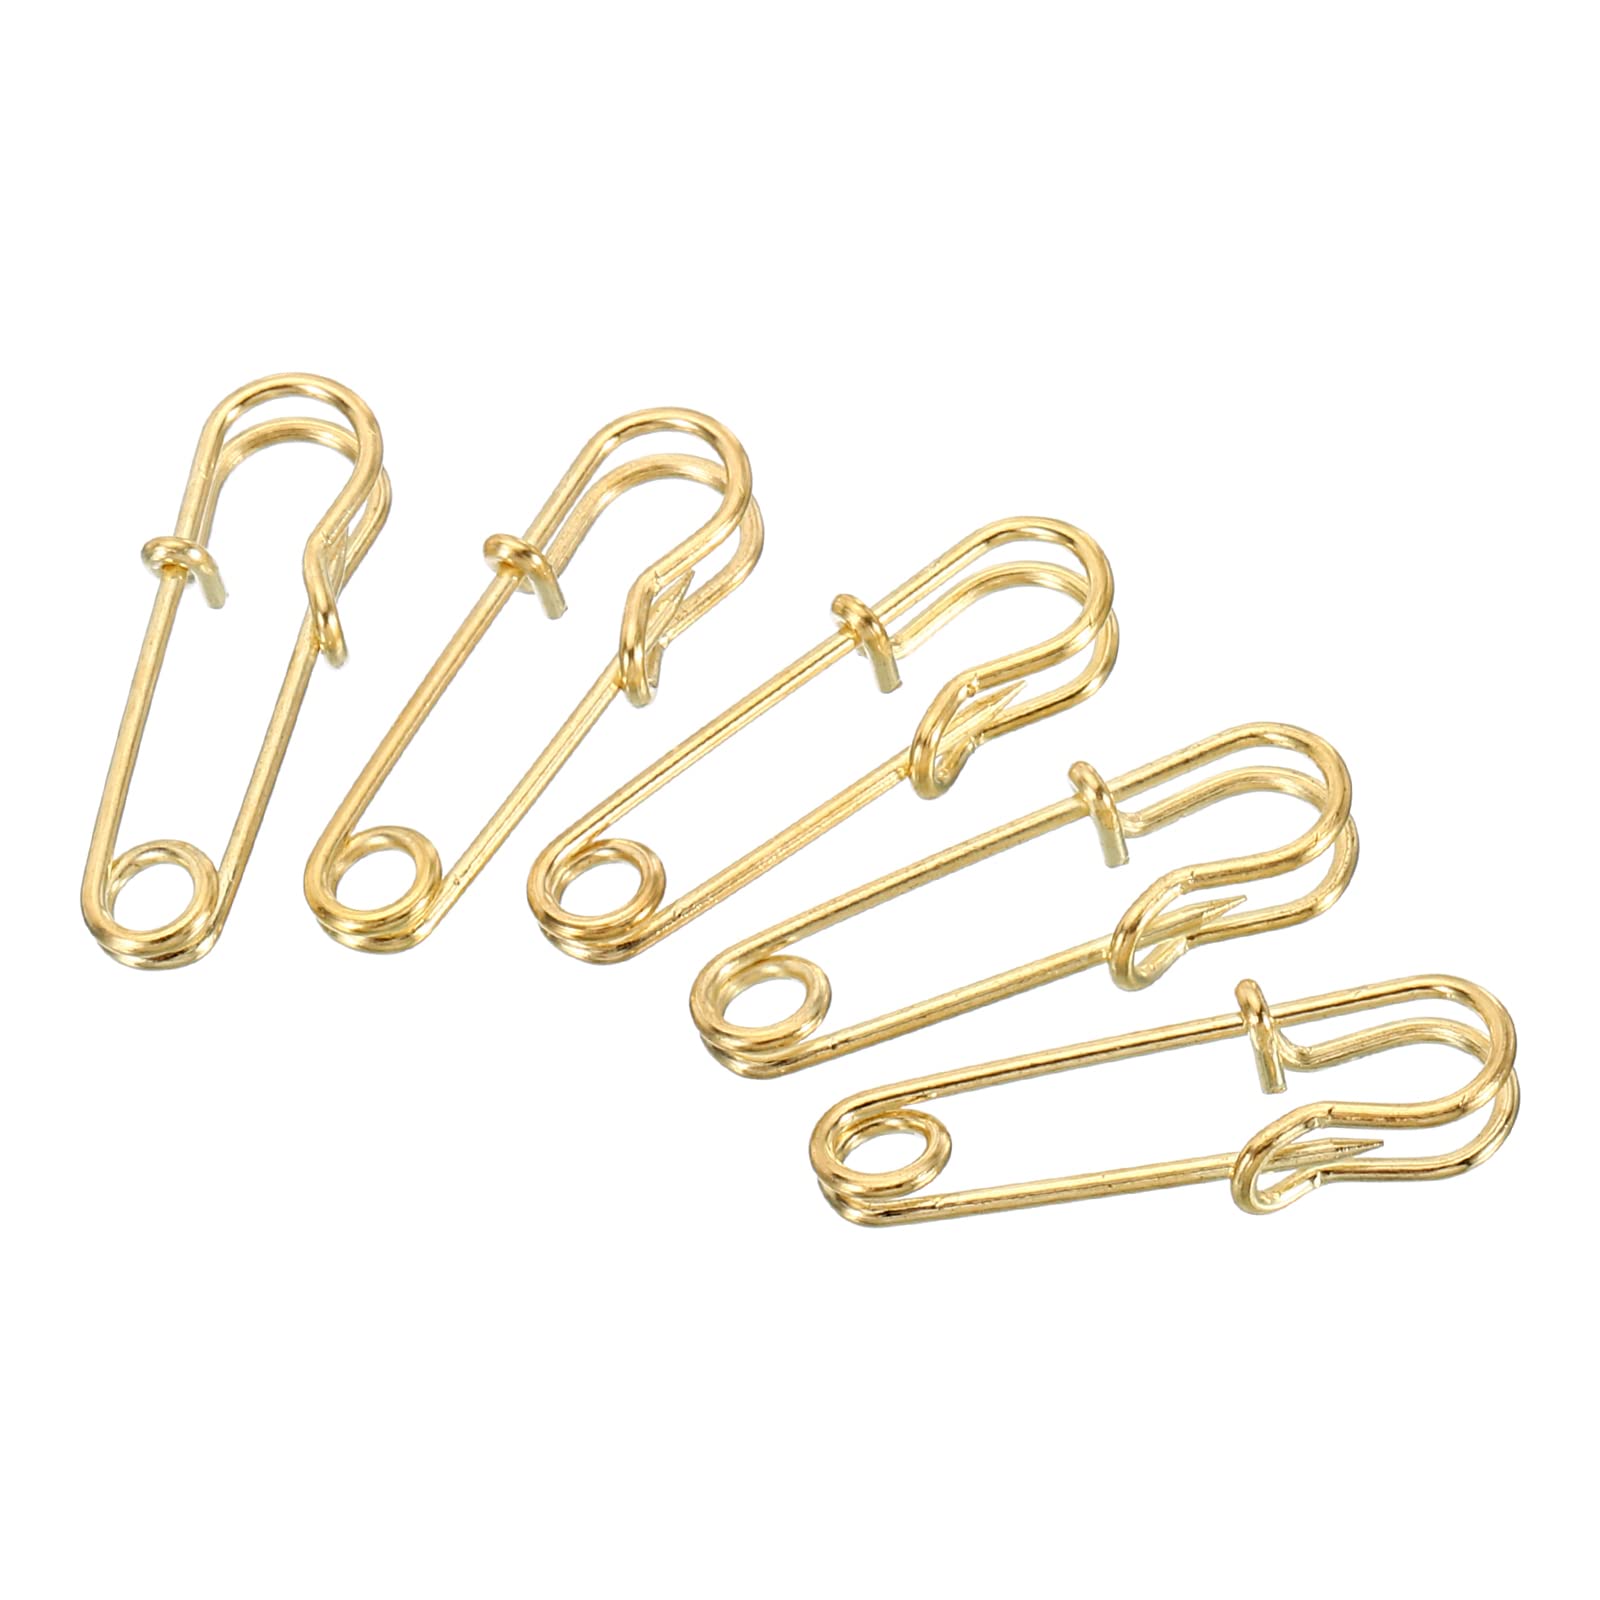 MECCANIXITY Safety Pins 1.06 Inch Large Metal Sewing Pins for